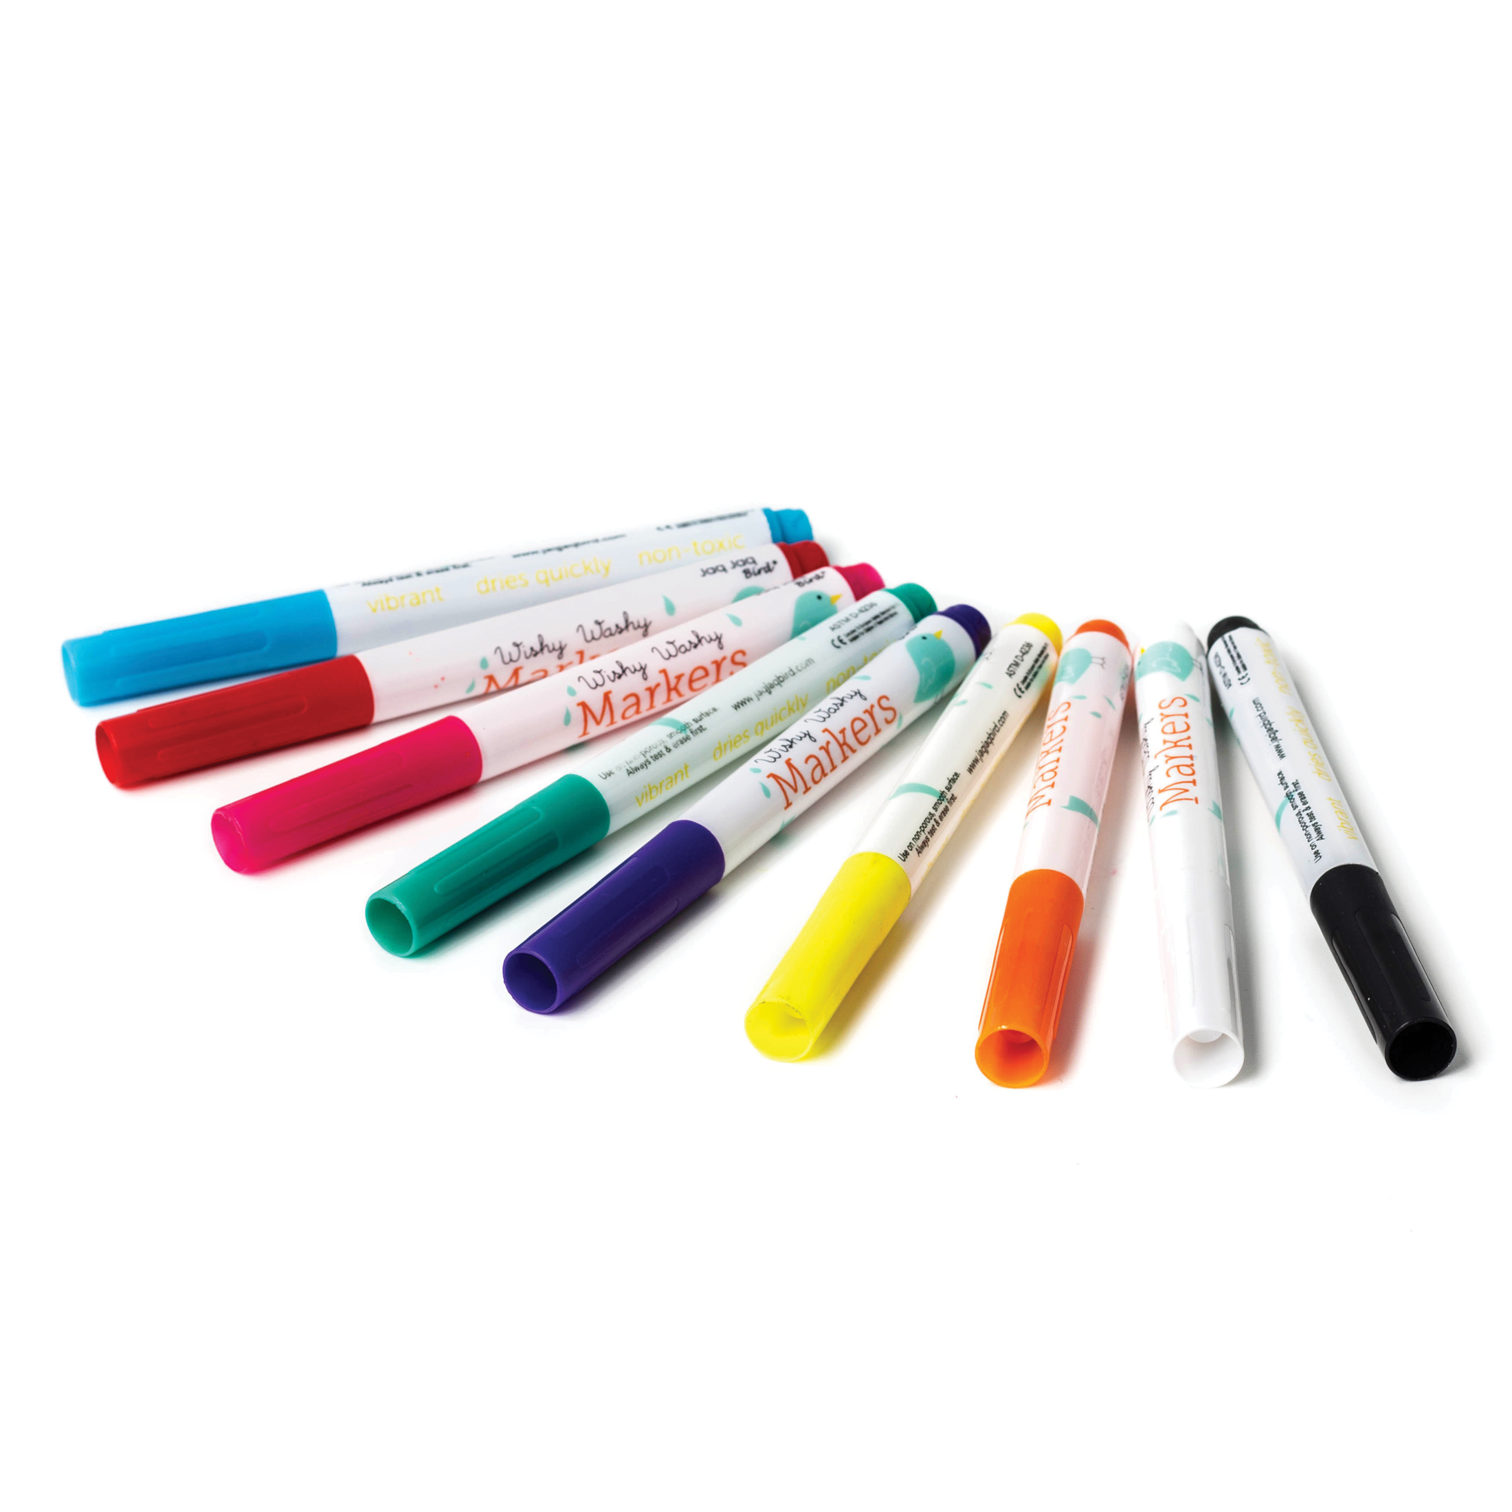 Wishy Washy Markers - 9 Piece Assorted Pack